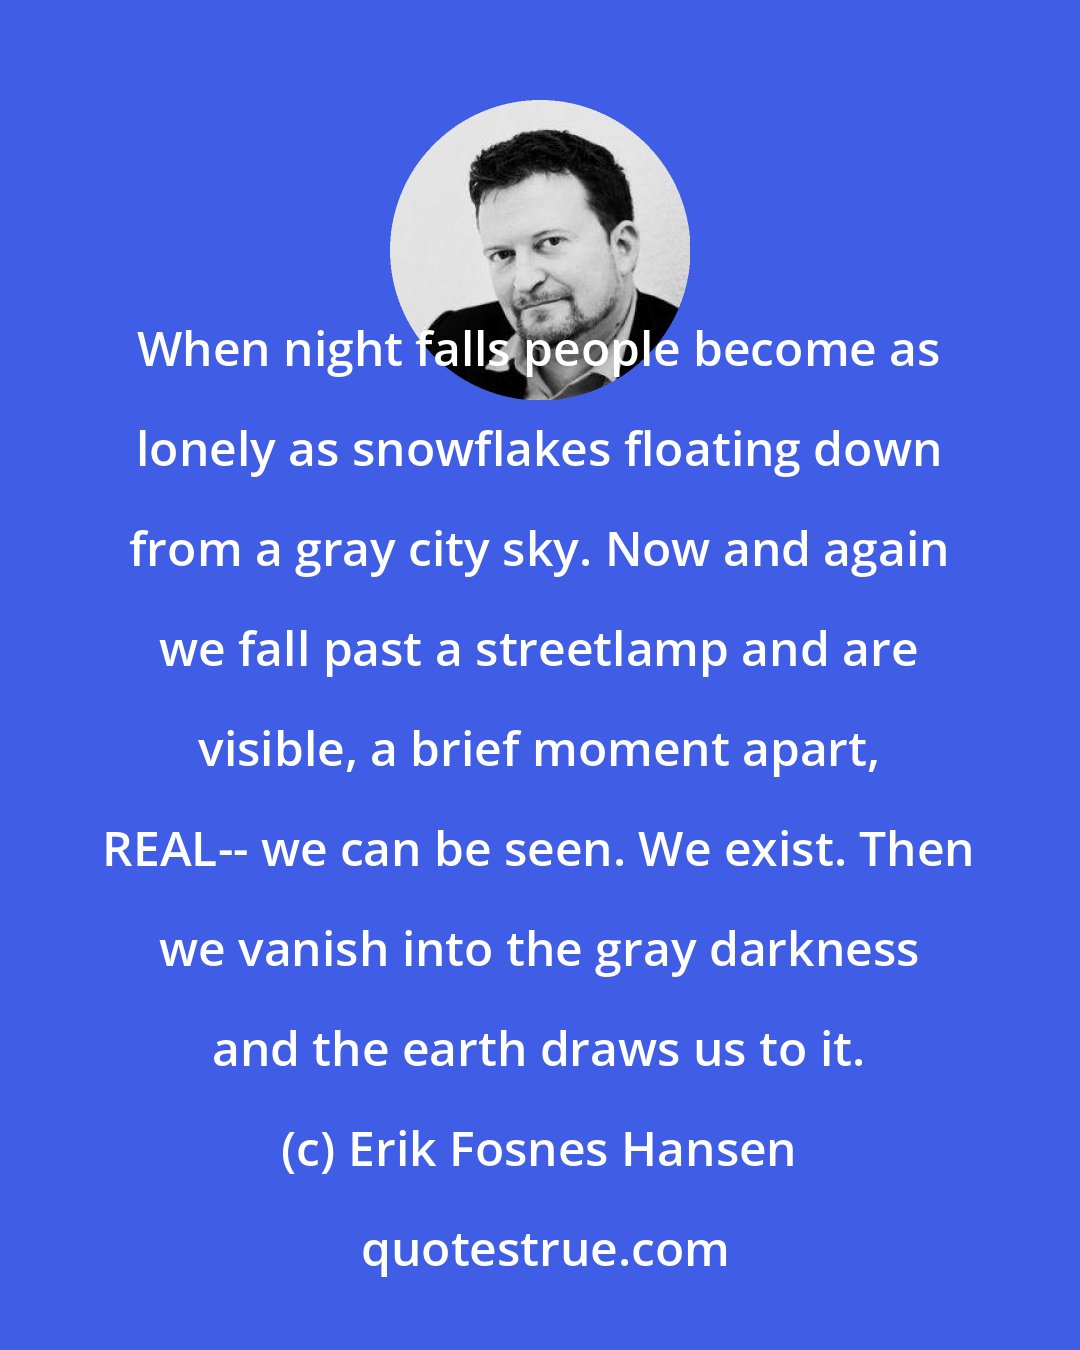 Erik Fosnes Hansen: When night falls people become as lonely as snowflakes floating down from a gray city sky. Now and again we fall past a streetlamp and are visible, a brief moment apart, REAL-- we can be seen. We exist. Then we vanish into the gray darkness and the earth draws us to it.